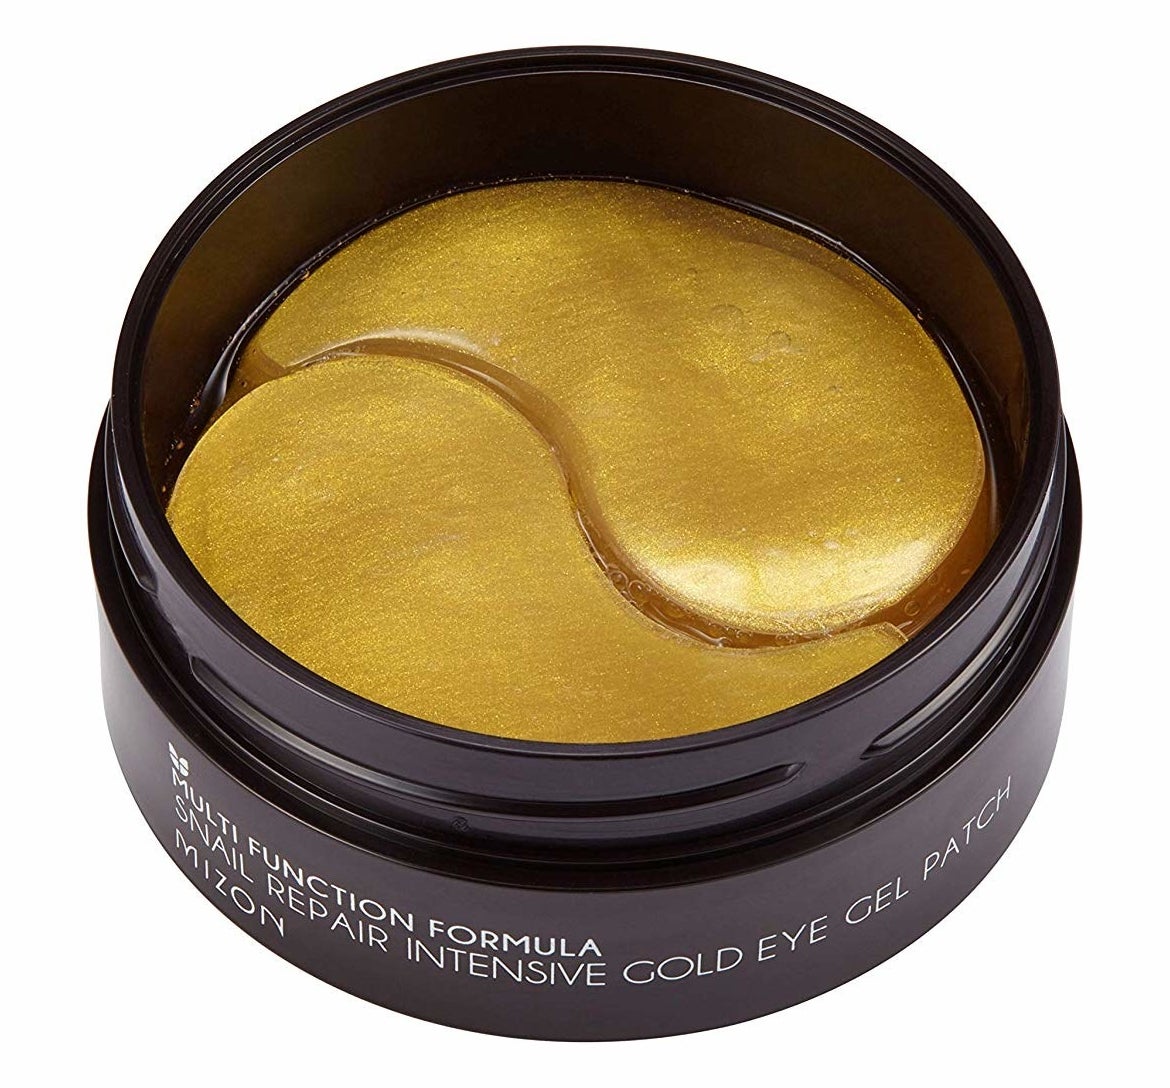 A jar of the eye masks in gold